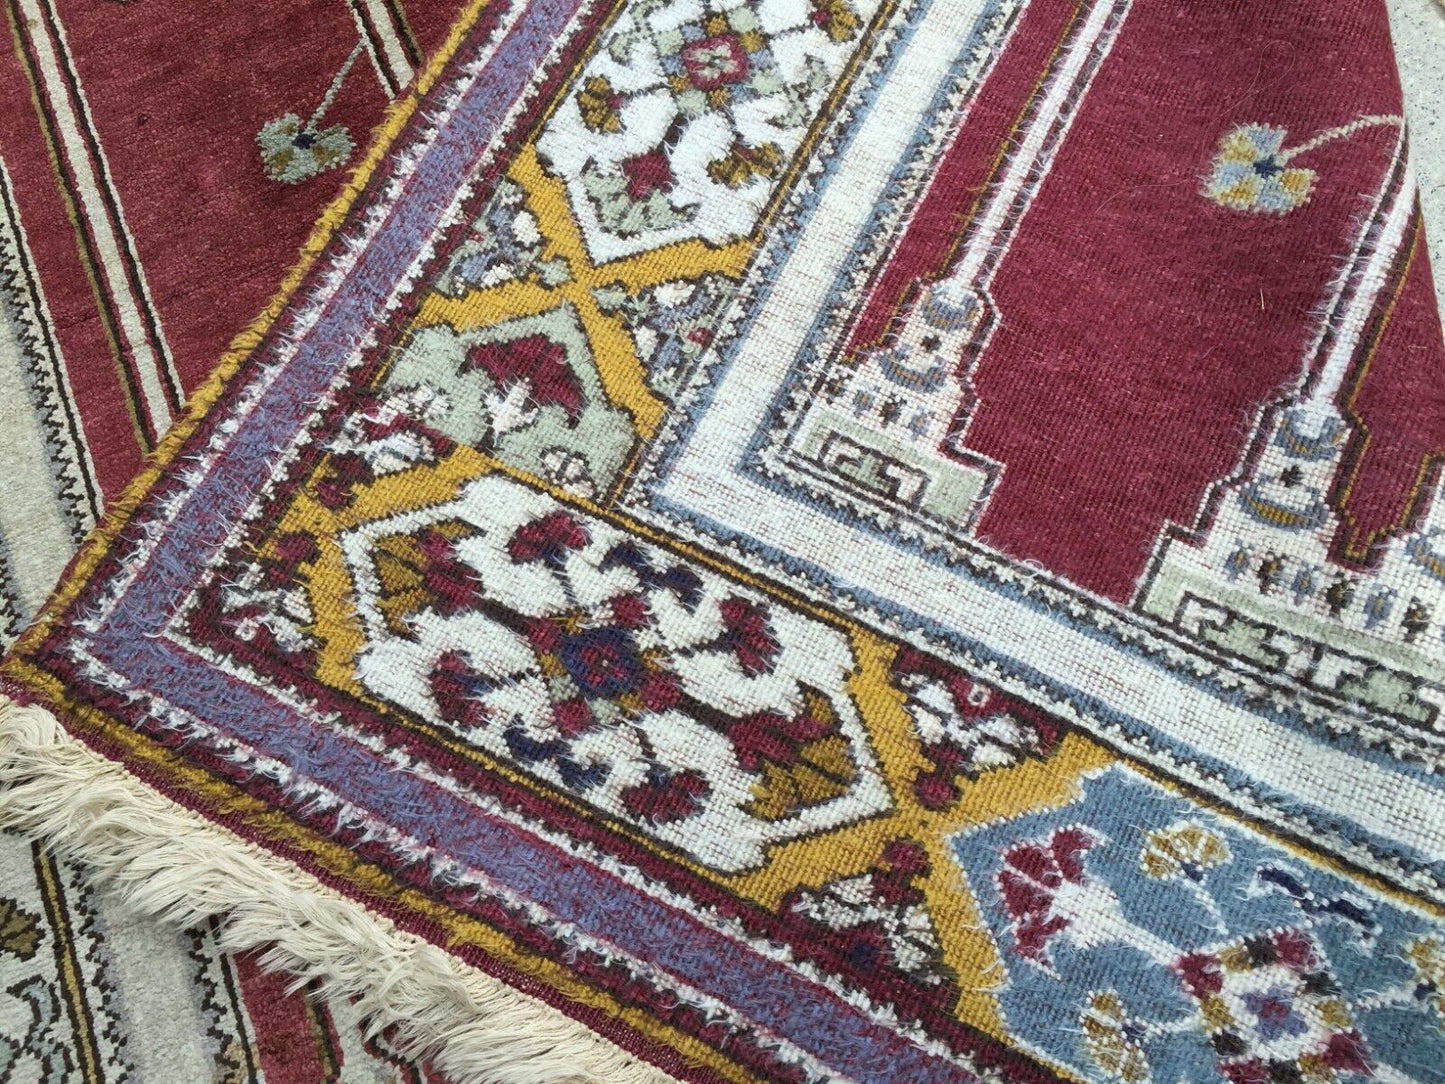 Back view of the rug highlighting its construction and dimensions